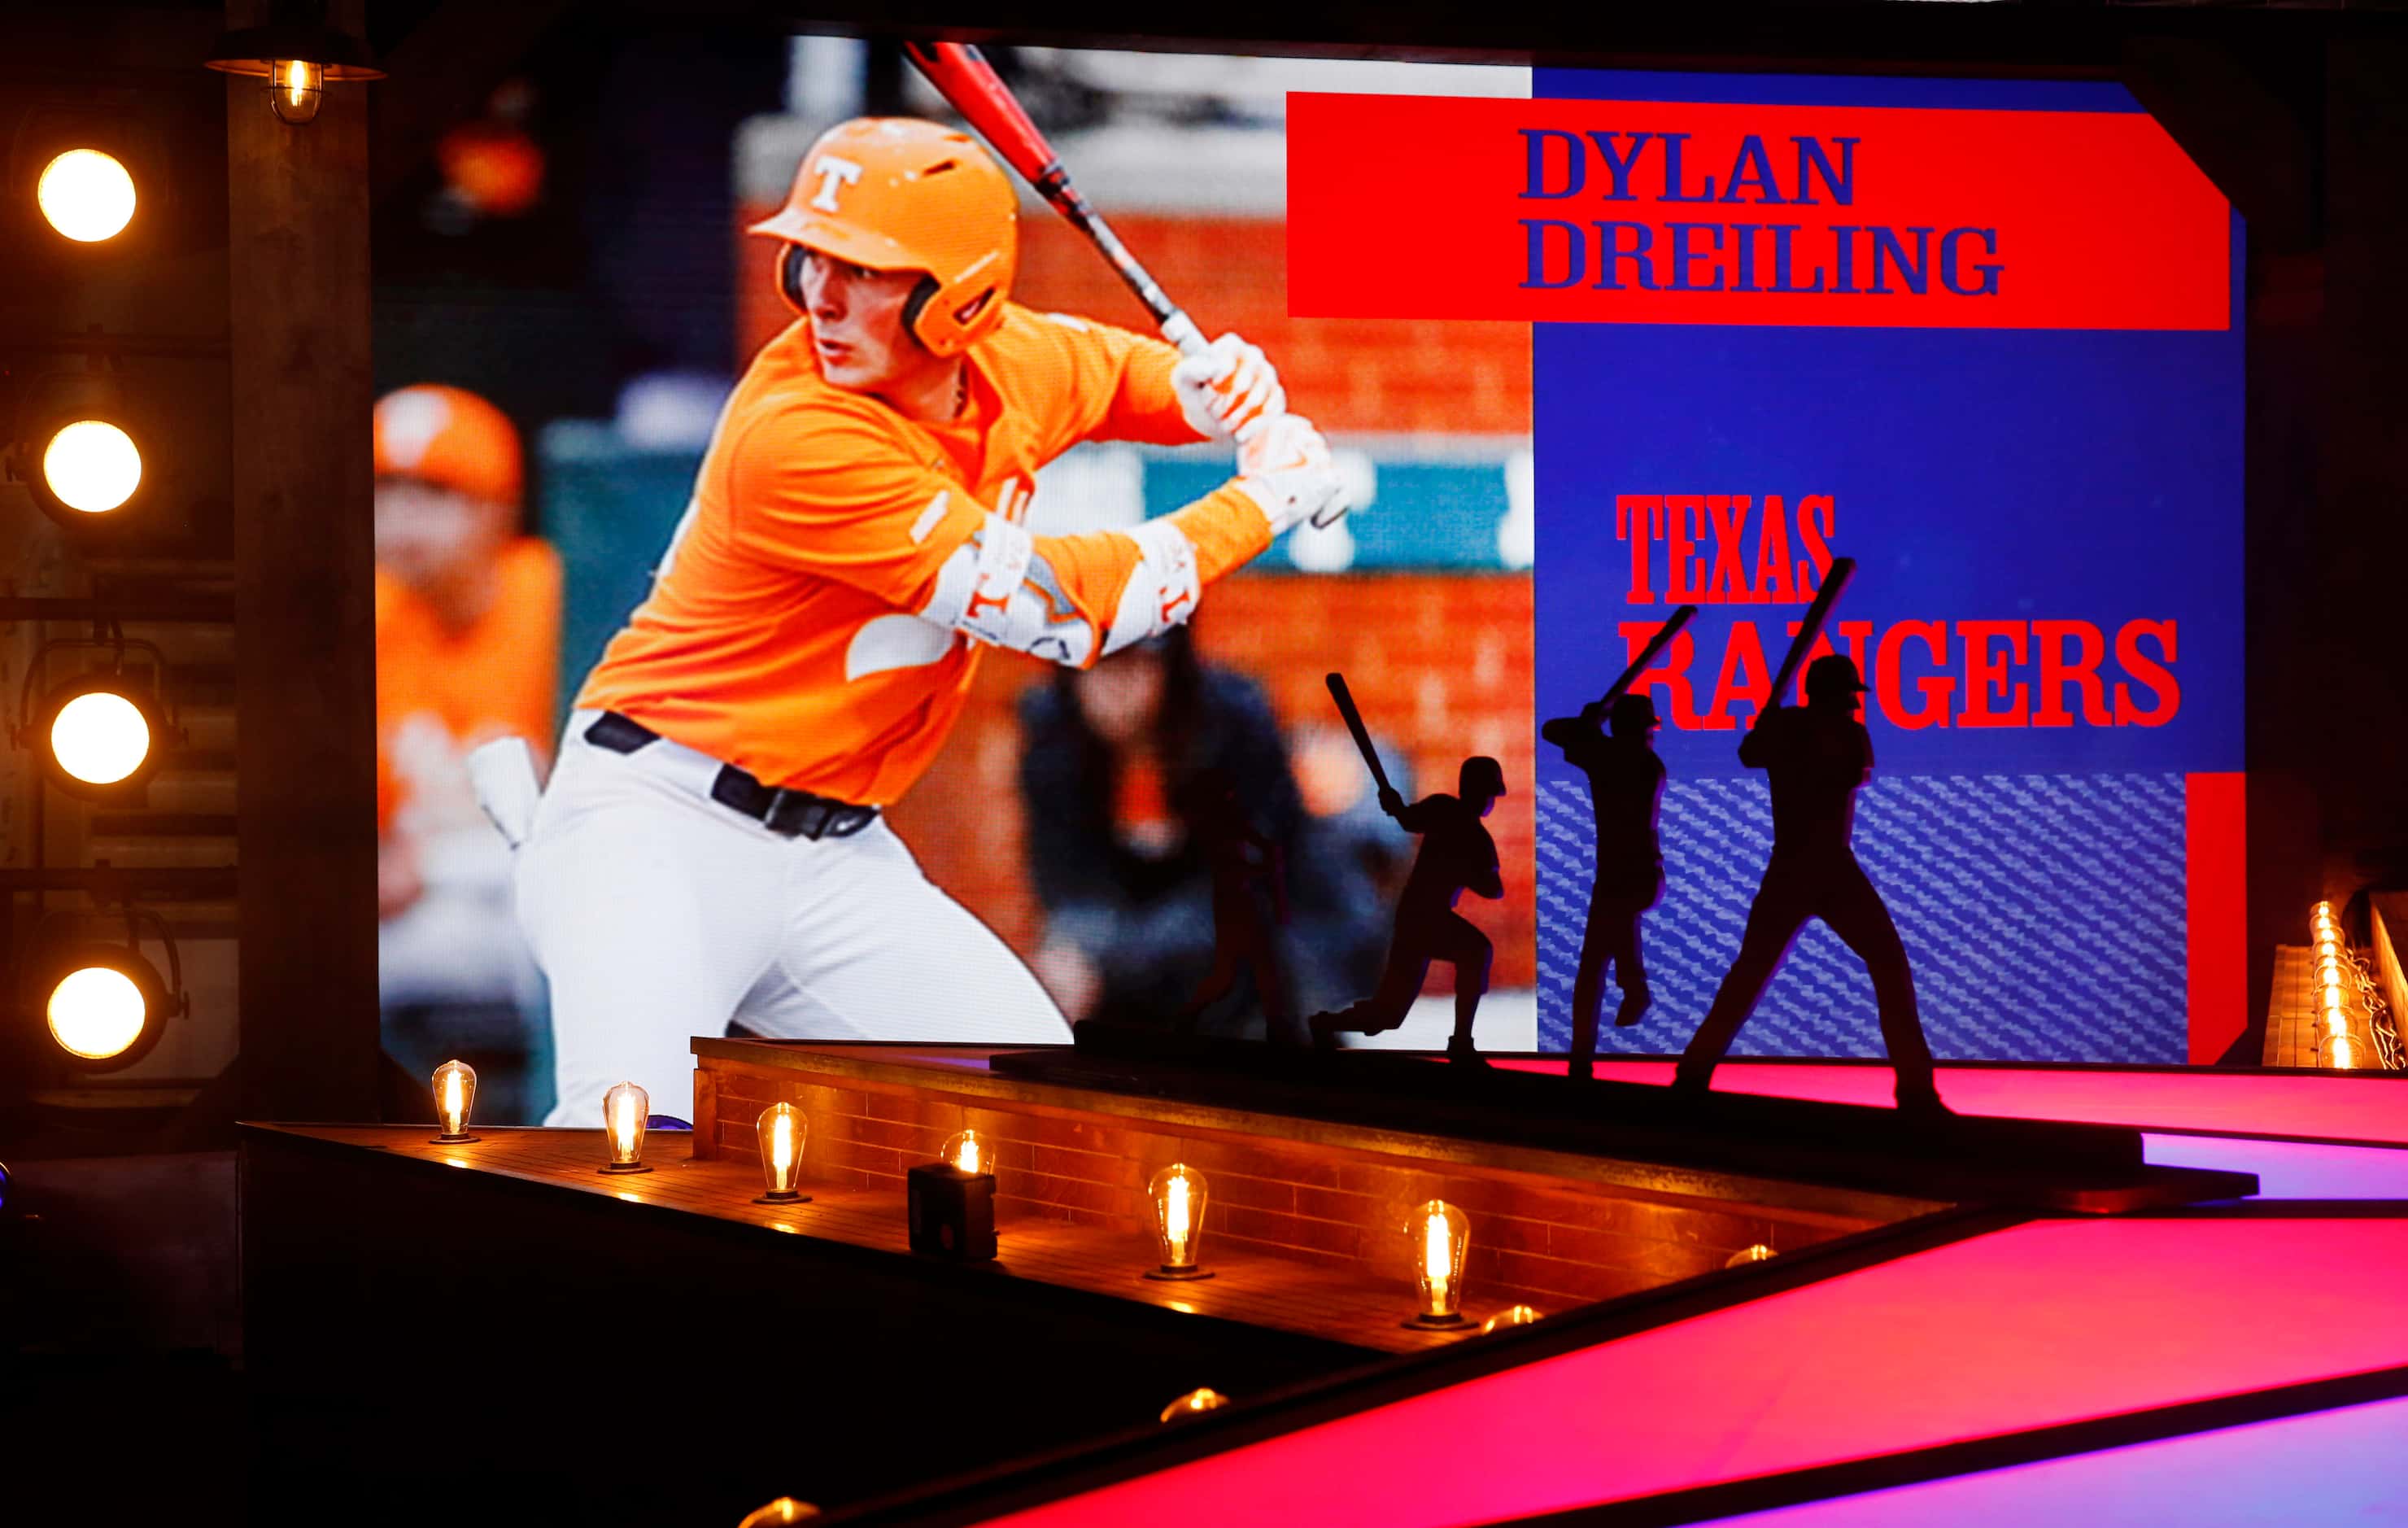 The Texas Rangers selected Tennessee outfielder Dylan Dreiling at No. 65 in the second round...